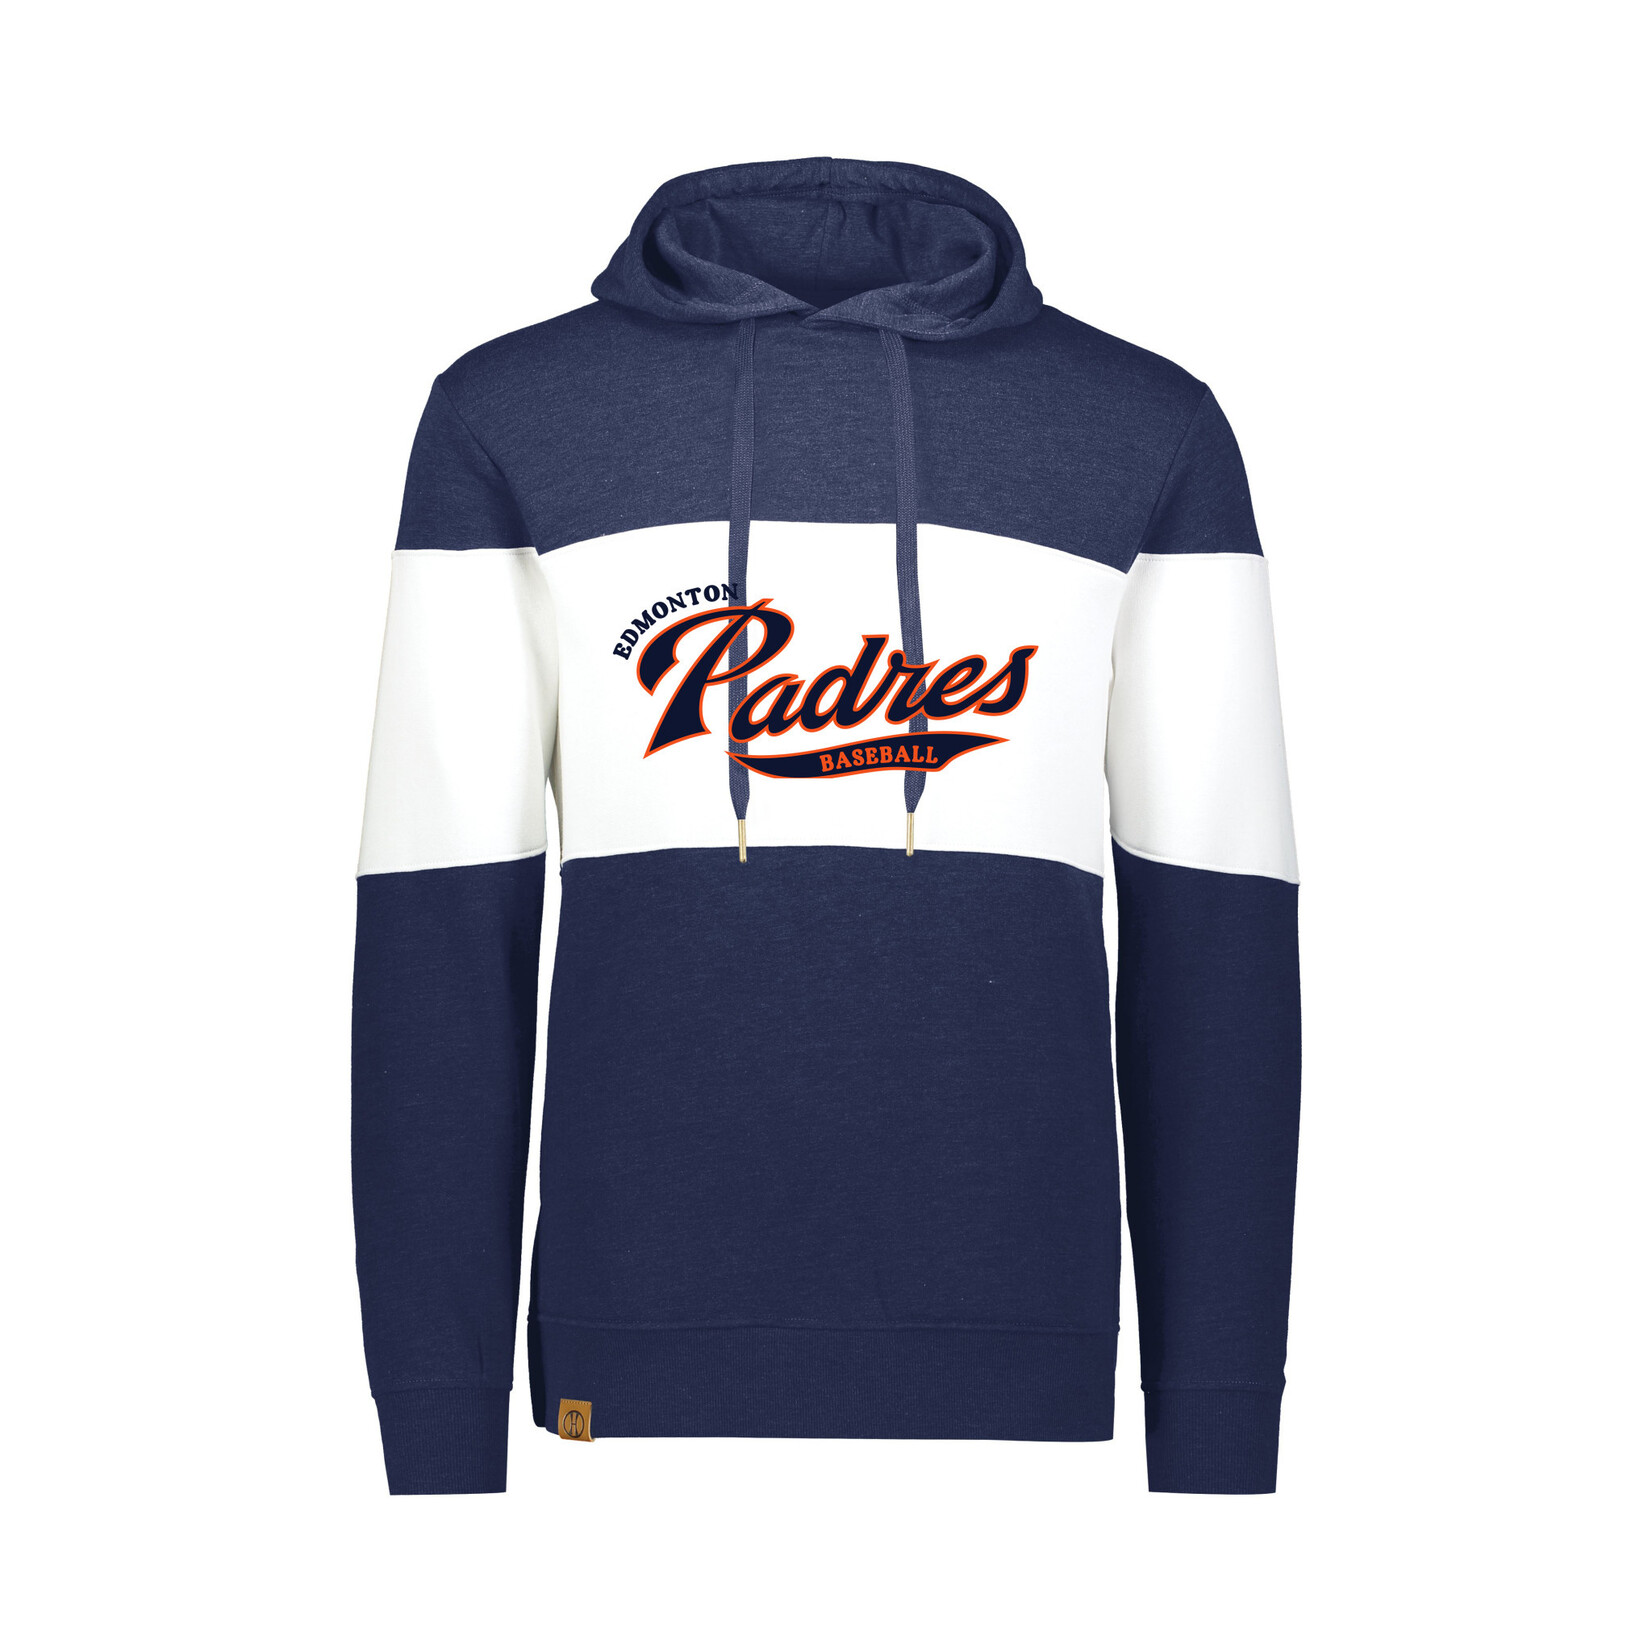 Russell Holloway All American Hoody